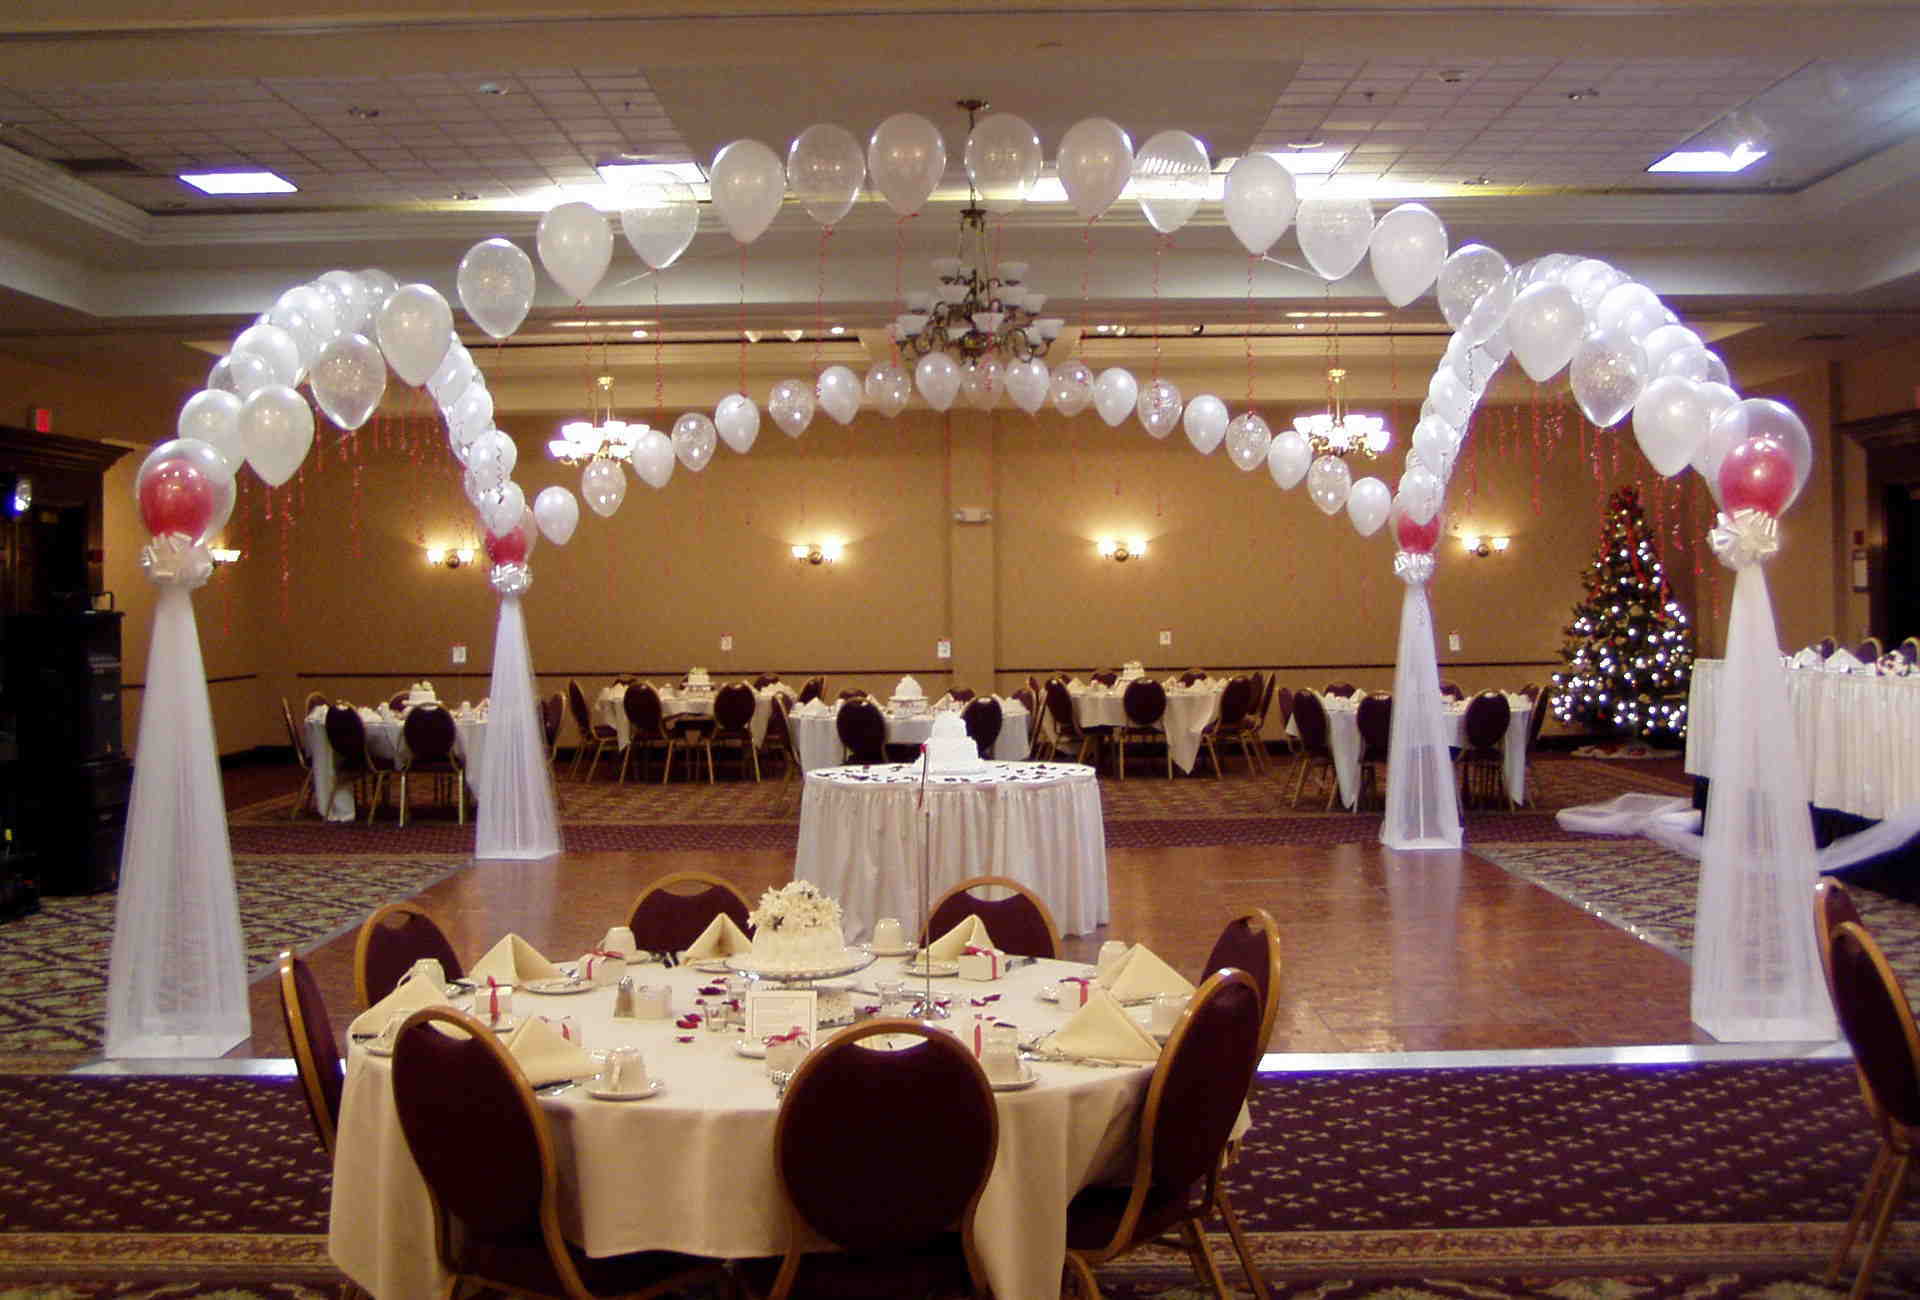 Wedding Decorations With Balloons